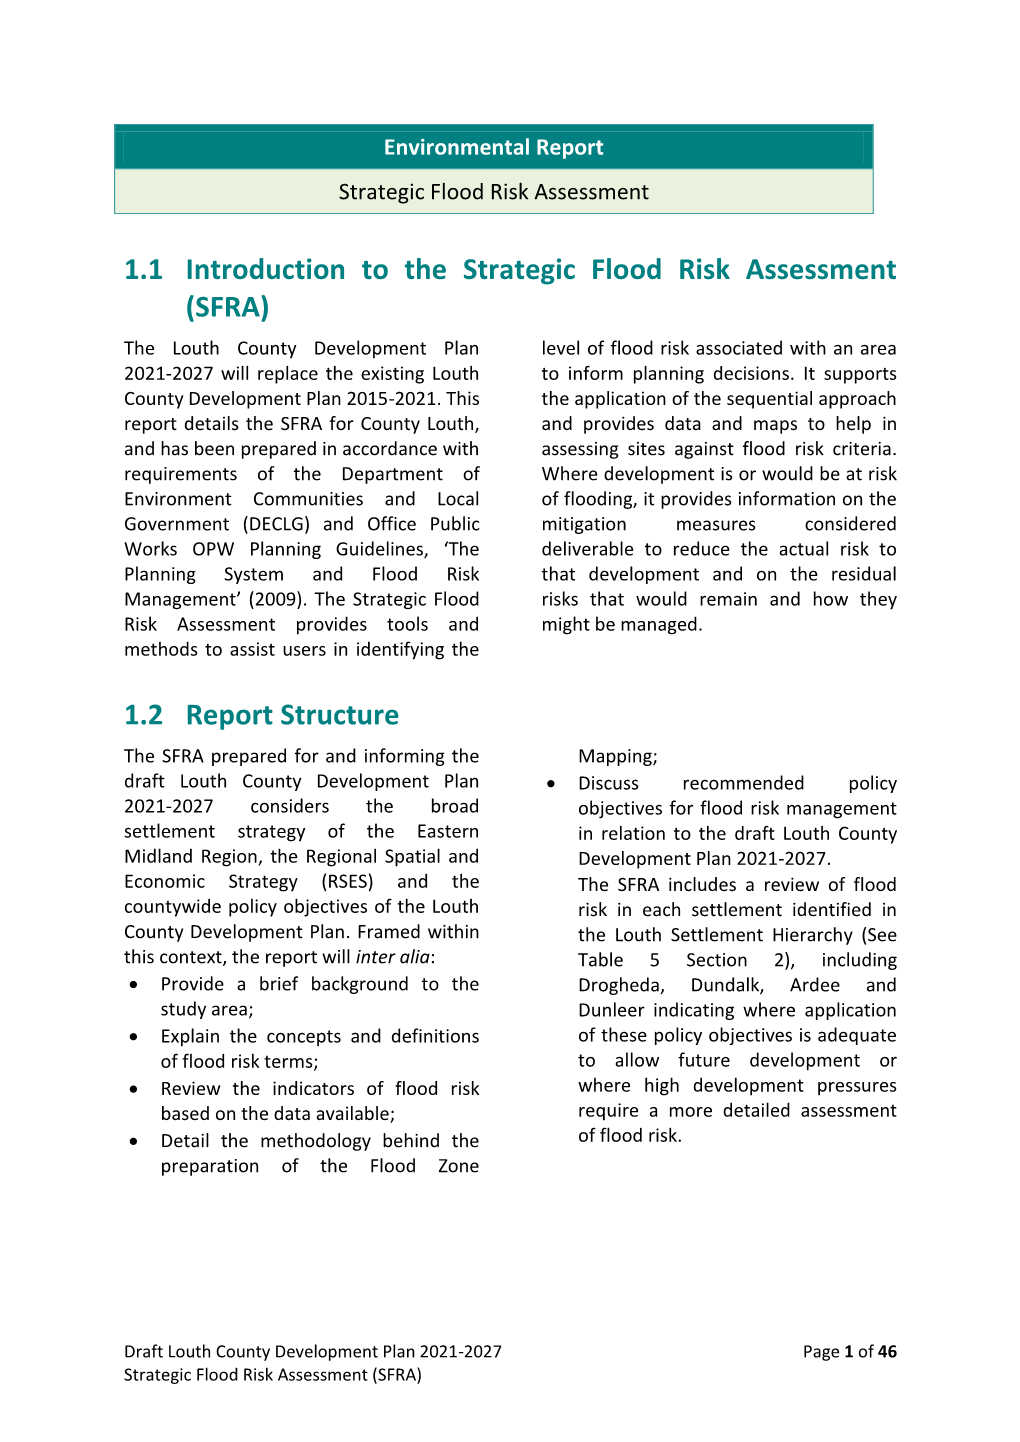 1.1 Introduction to the Strategic Flood Risk Assessment (SFRA)